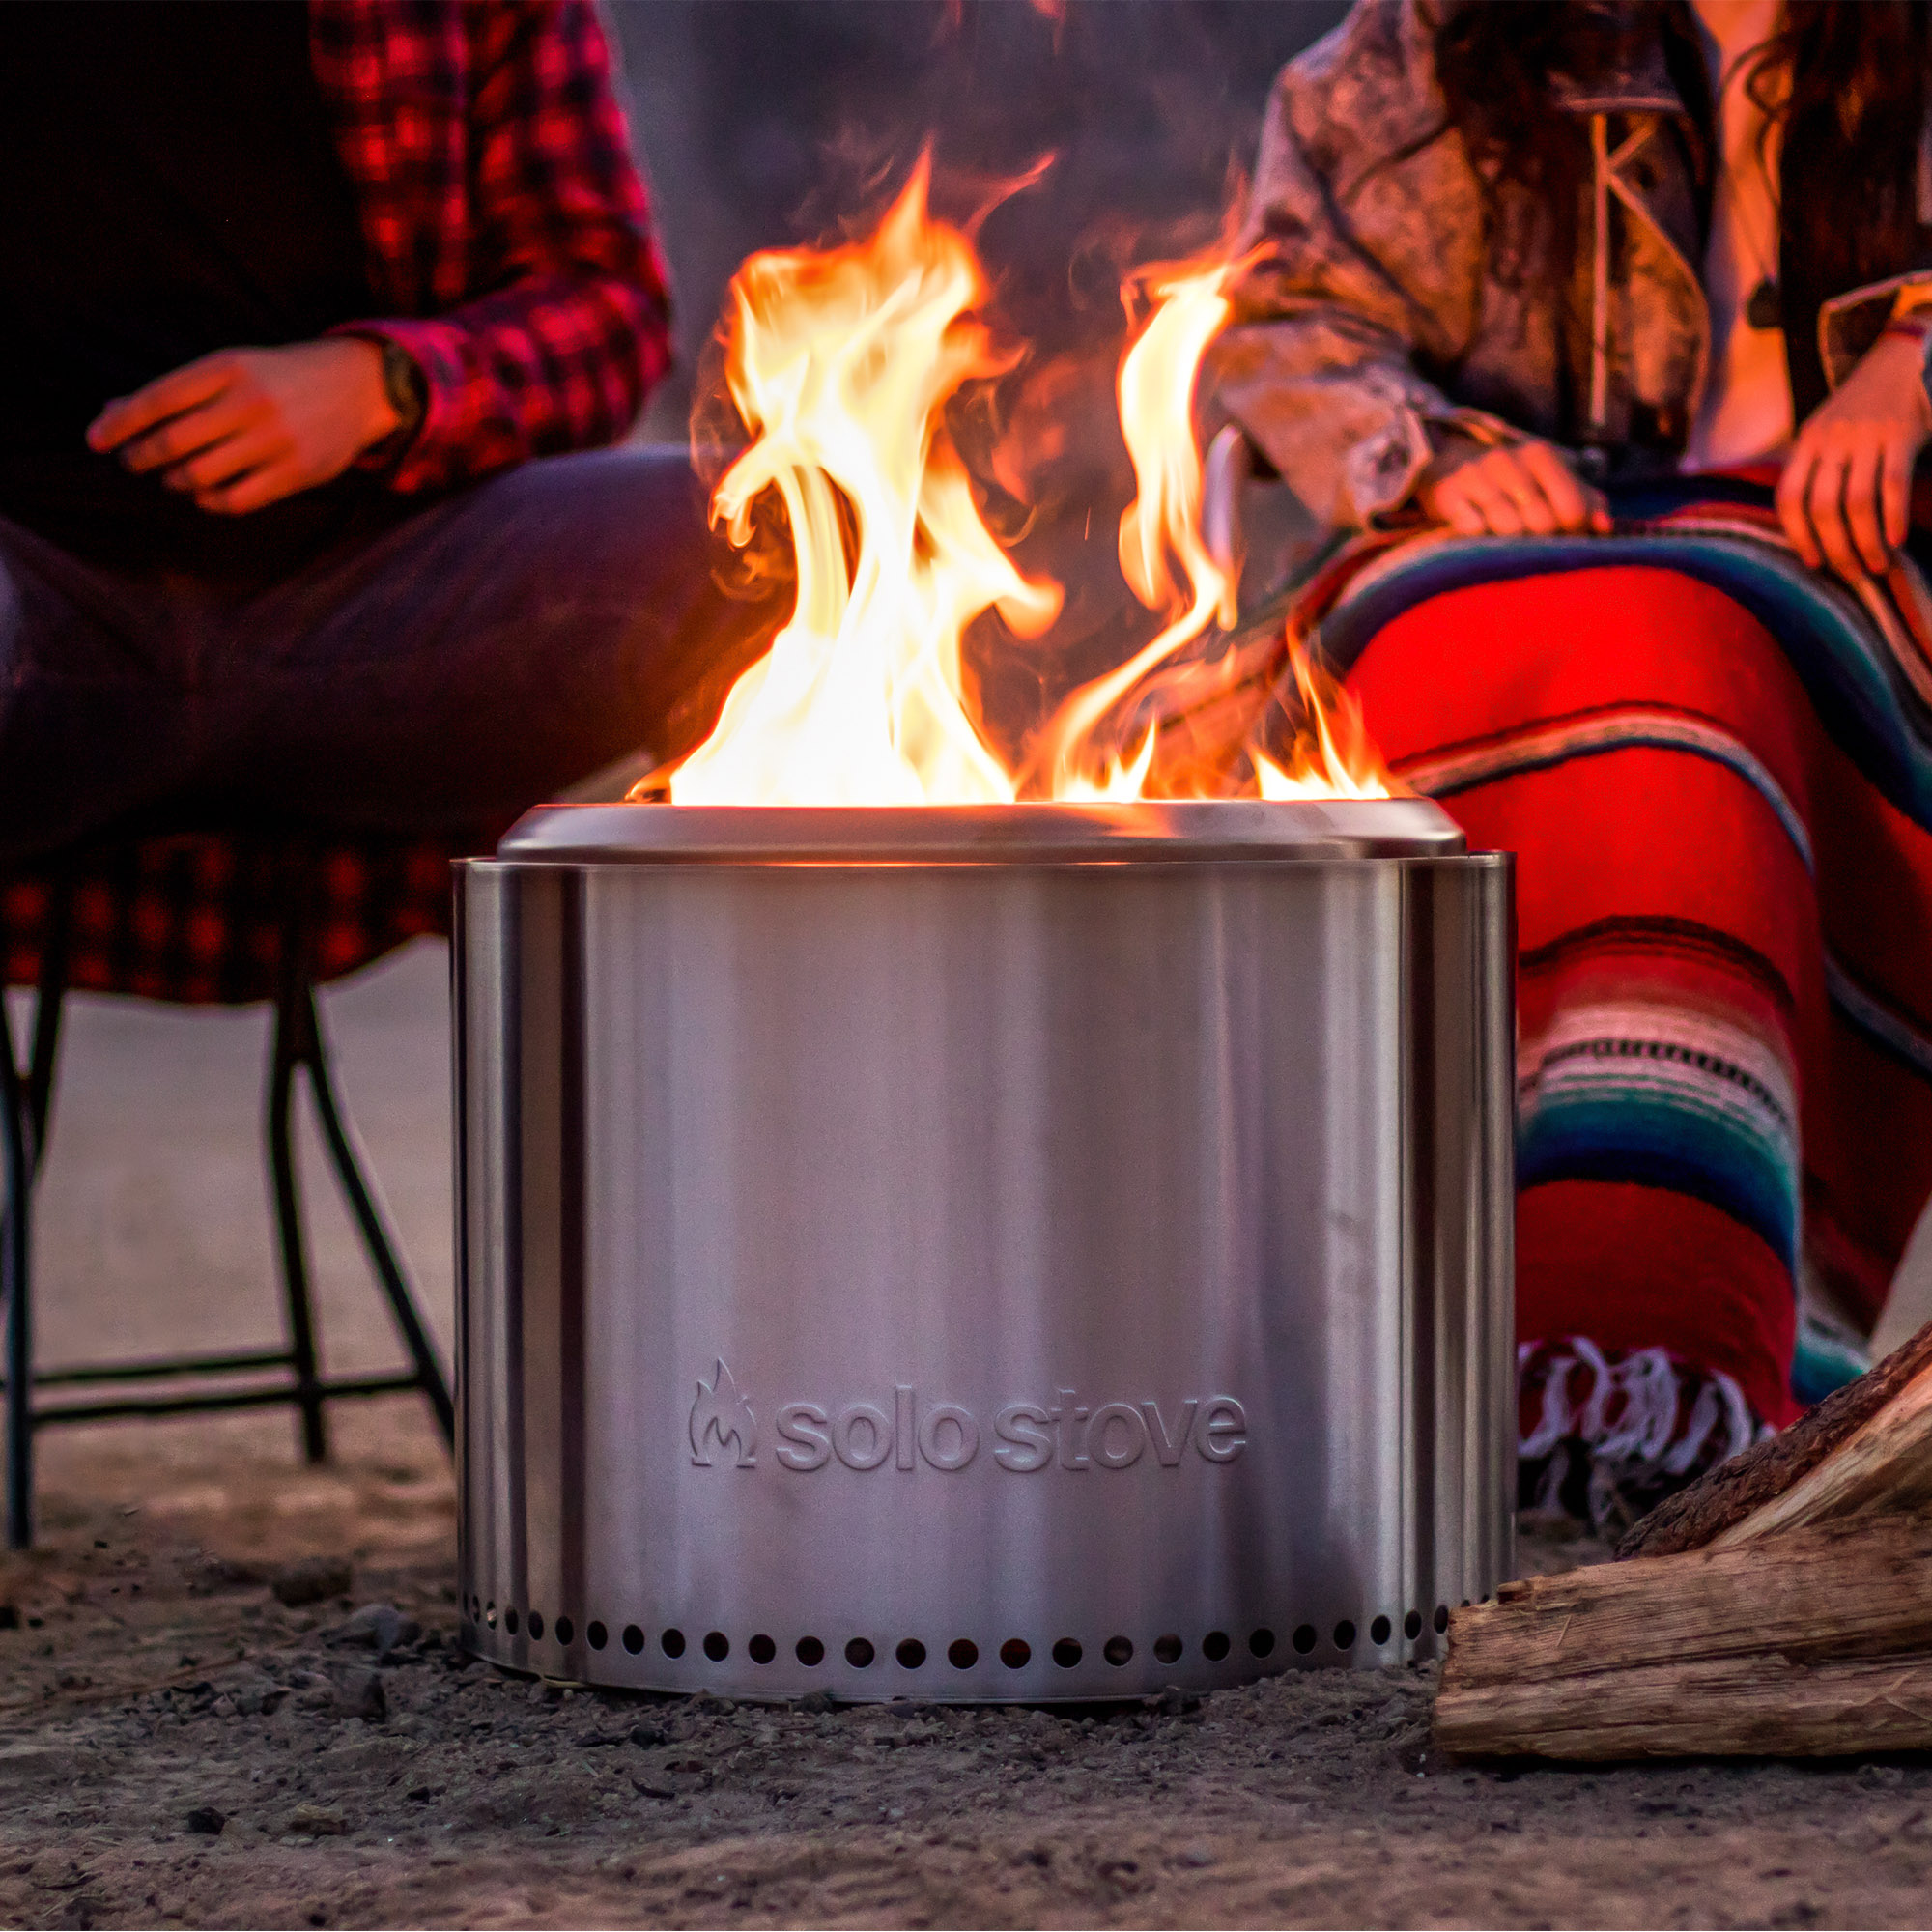 Solo Stove Announces the Fire Pit 2.0 - Easier Cleanup